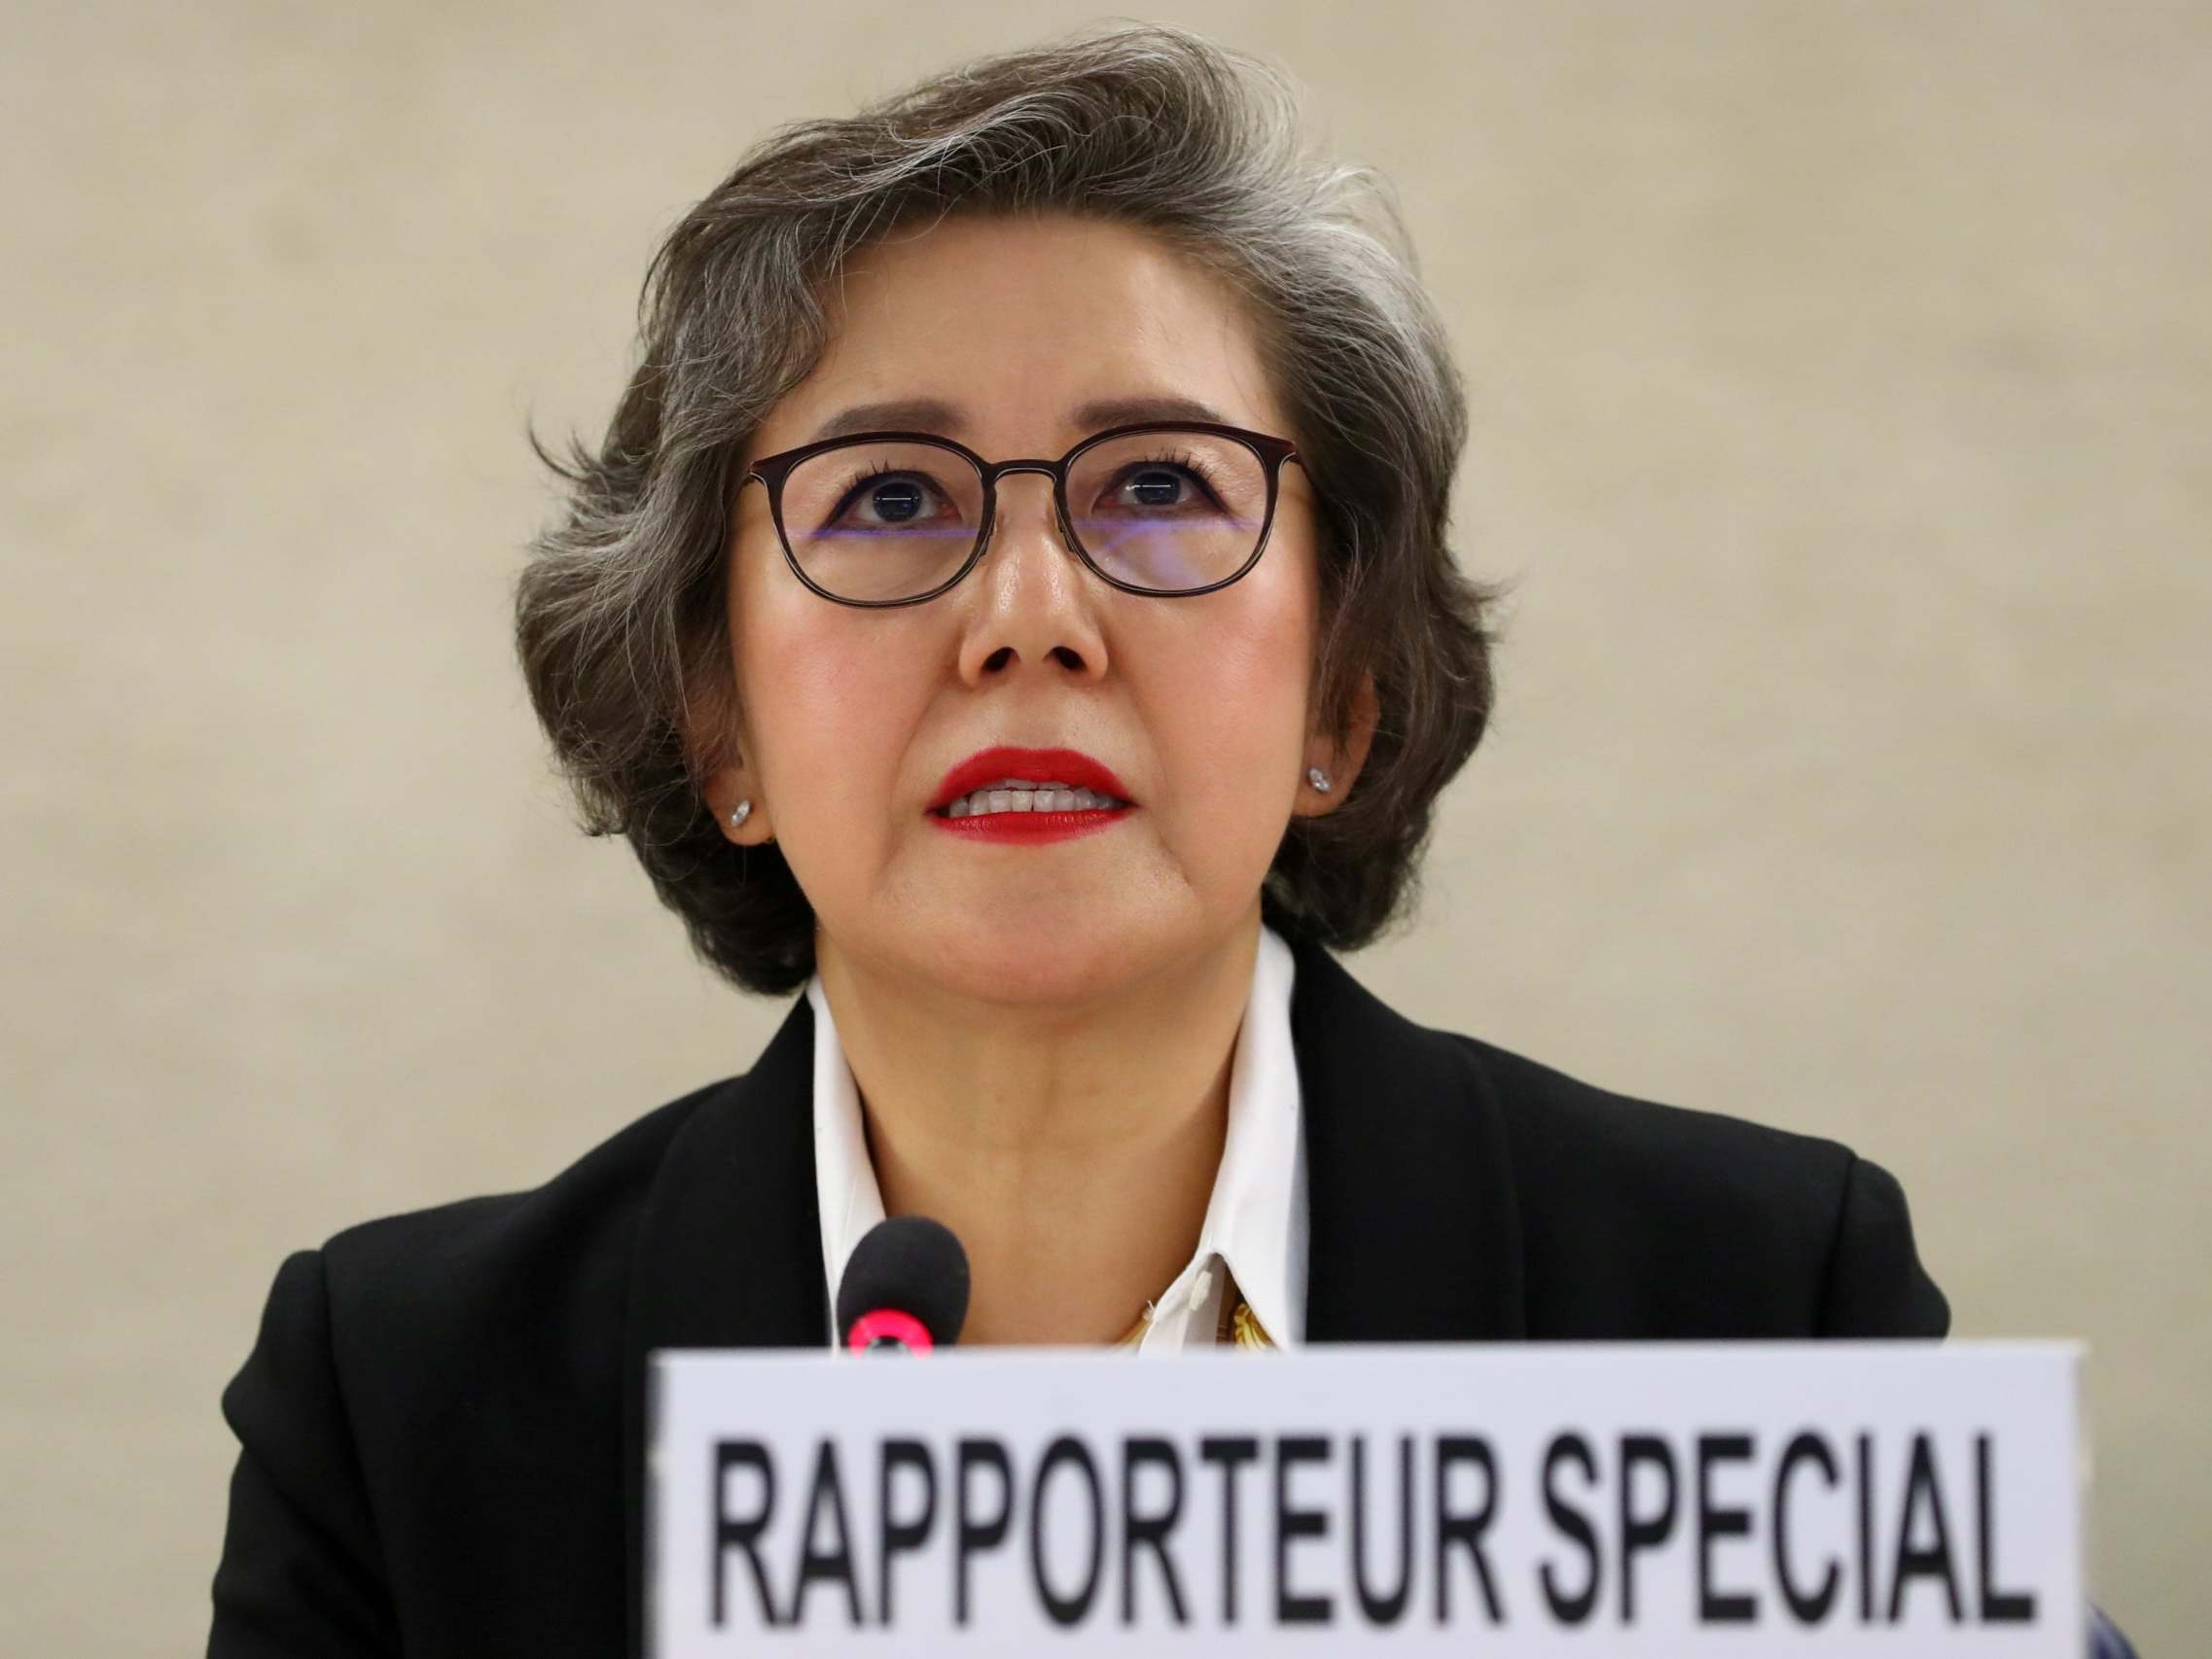 Special Rapporteur on the situation of human rights in Myanmar, Yanghee Lee gives her report to the Human Rights Council at the United Nations in Geneva